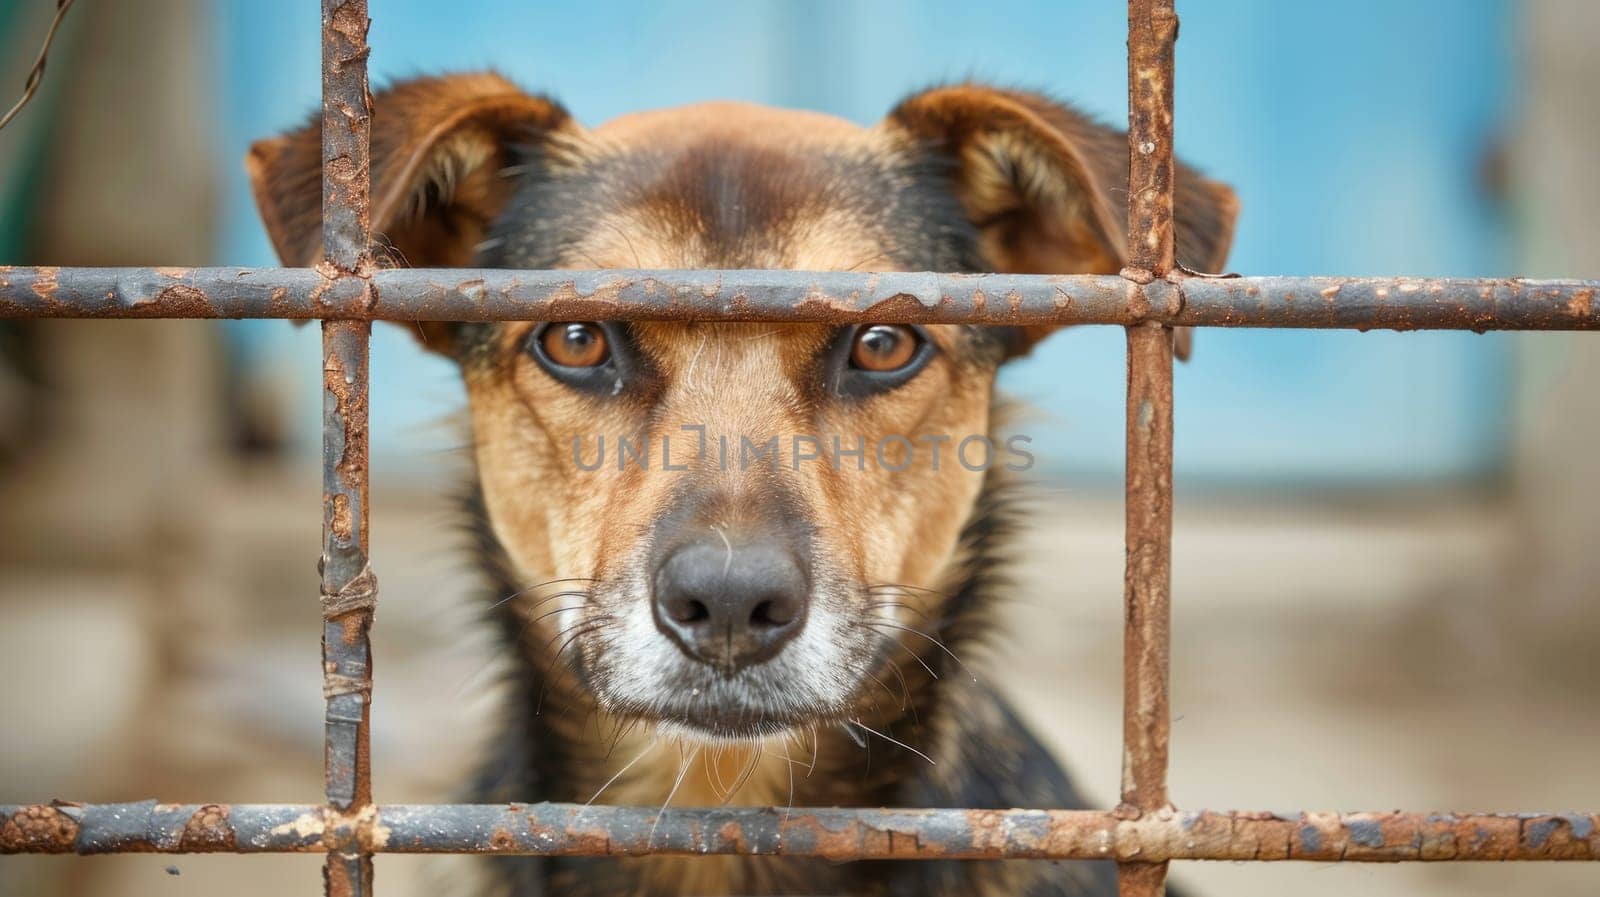 A dog is looking through a metal fence. The dog is brown and black. The fence is rusted and has a blue door